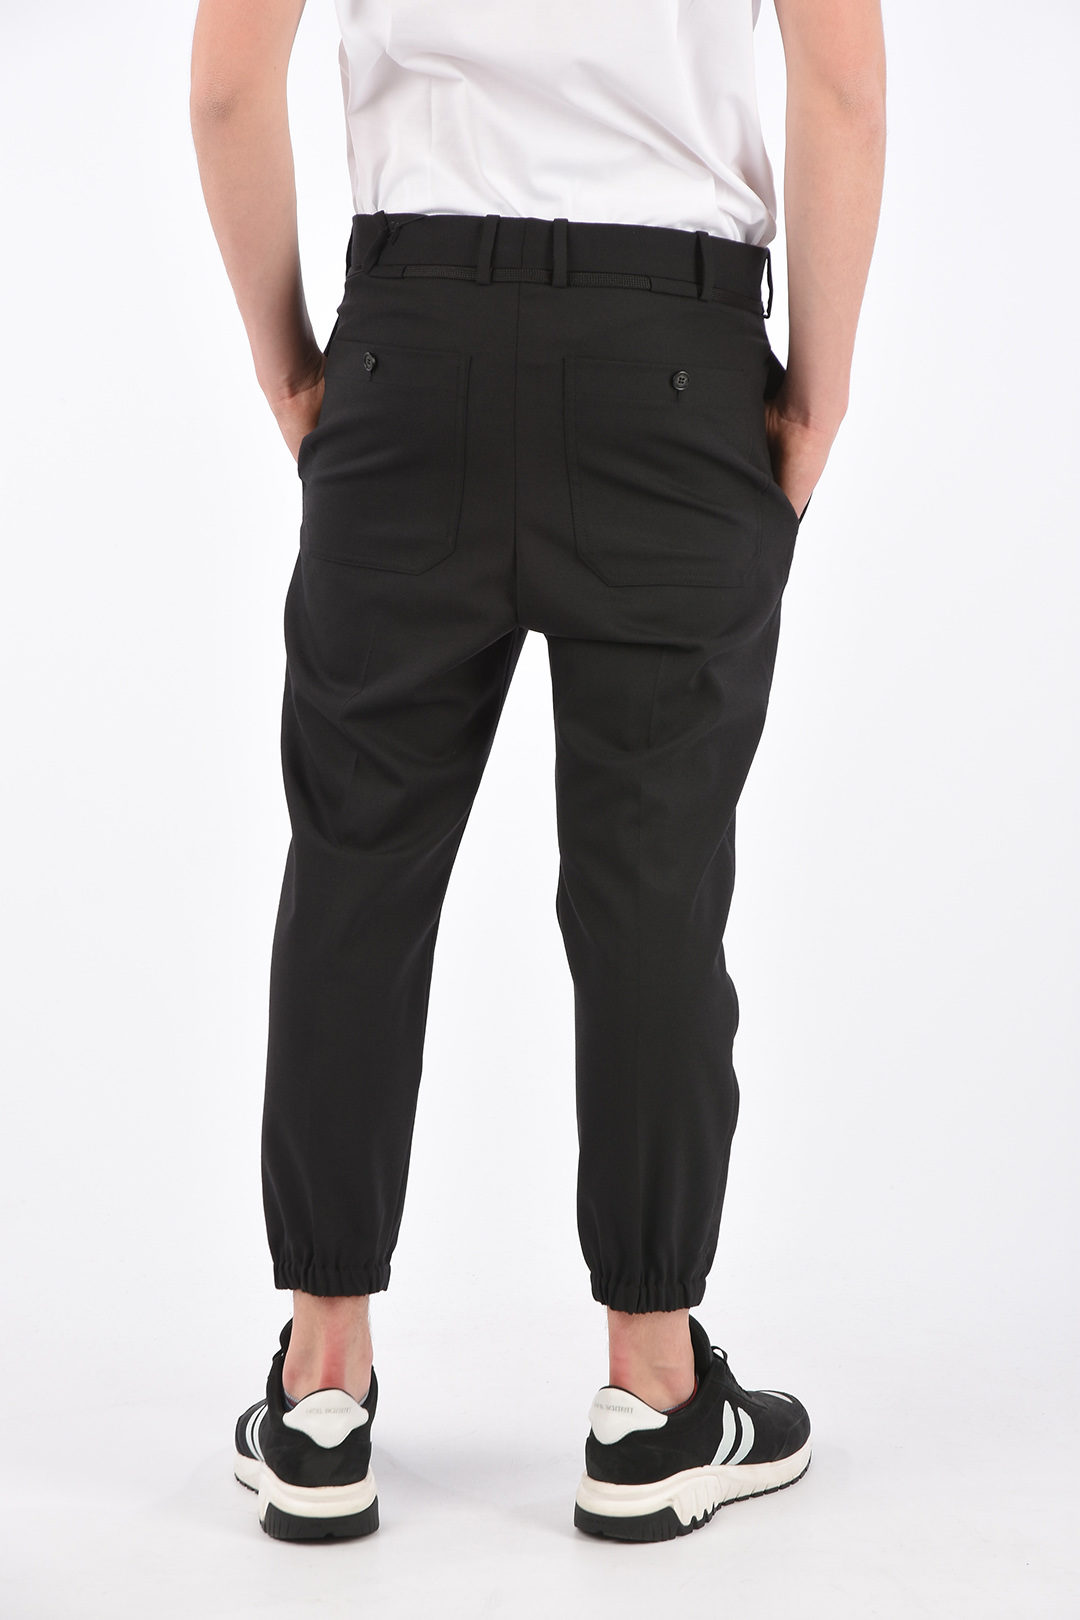 Neil Barrett Dropped Crotch Fit Pants with Elastic Ankle Band men ...